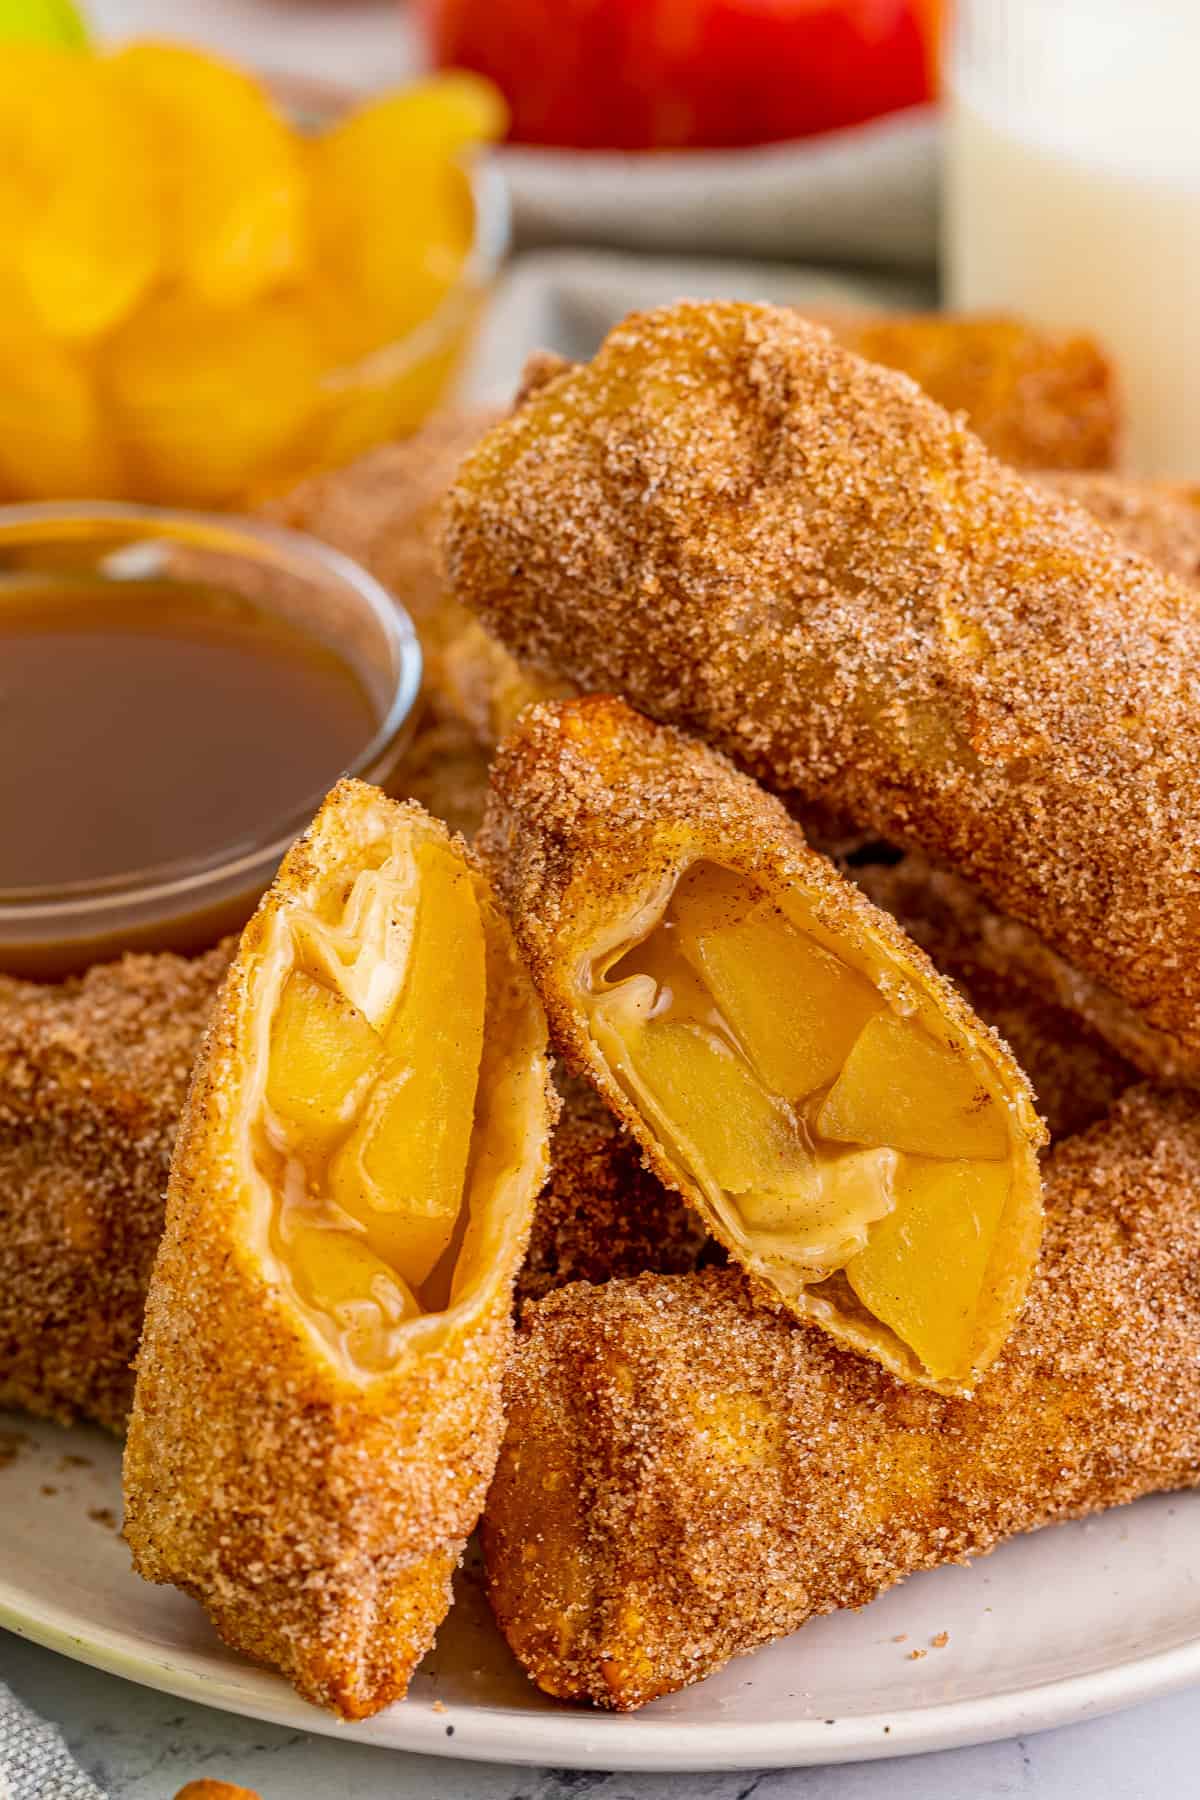 Apple pie egg rolls coated in cinnamon sugar and served with caramel sauce for dipping. One egg roll is cut in half to show apple pie filling.